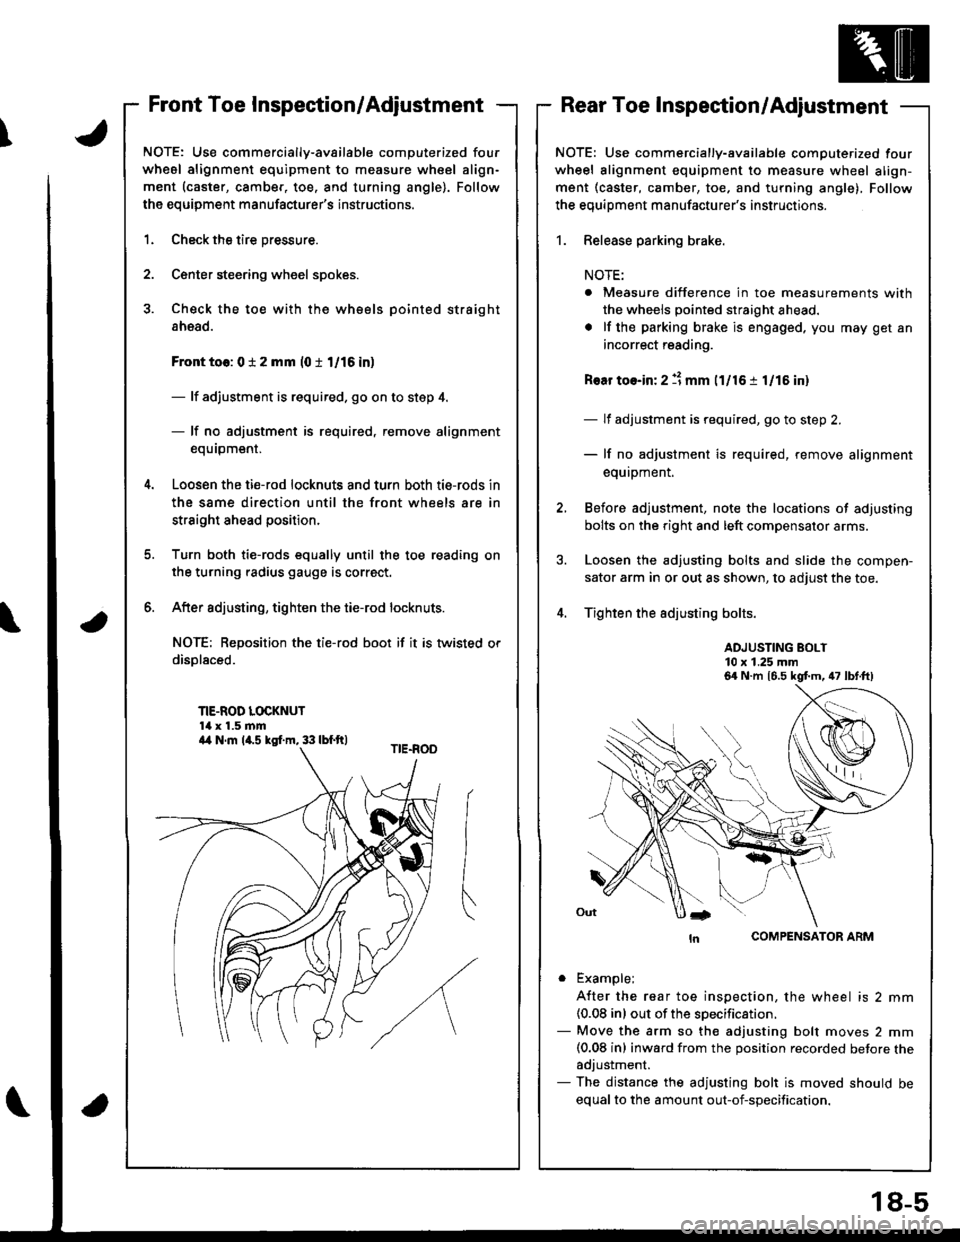 HONDA INTEGRA 1998 4.G Workshop Manual \
Front Toe Inspection/AdjustmentRear Toe Inspection/Adjustment
NOTE: Use commercially-available computerized four
whesl alignment equipment to measure wheel align-
ment (caster, camber, toe. and turn